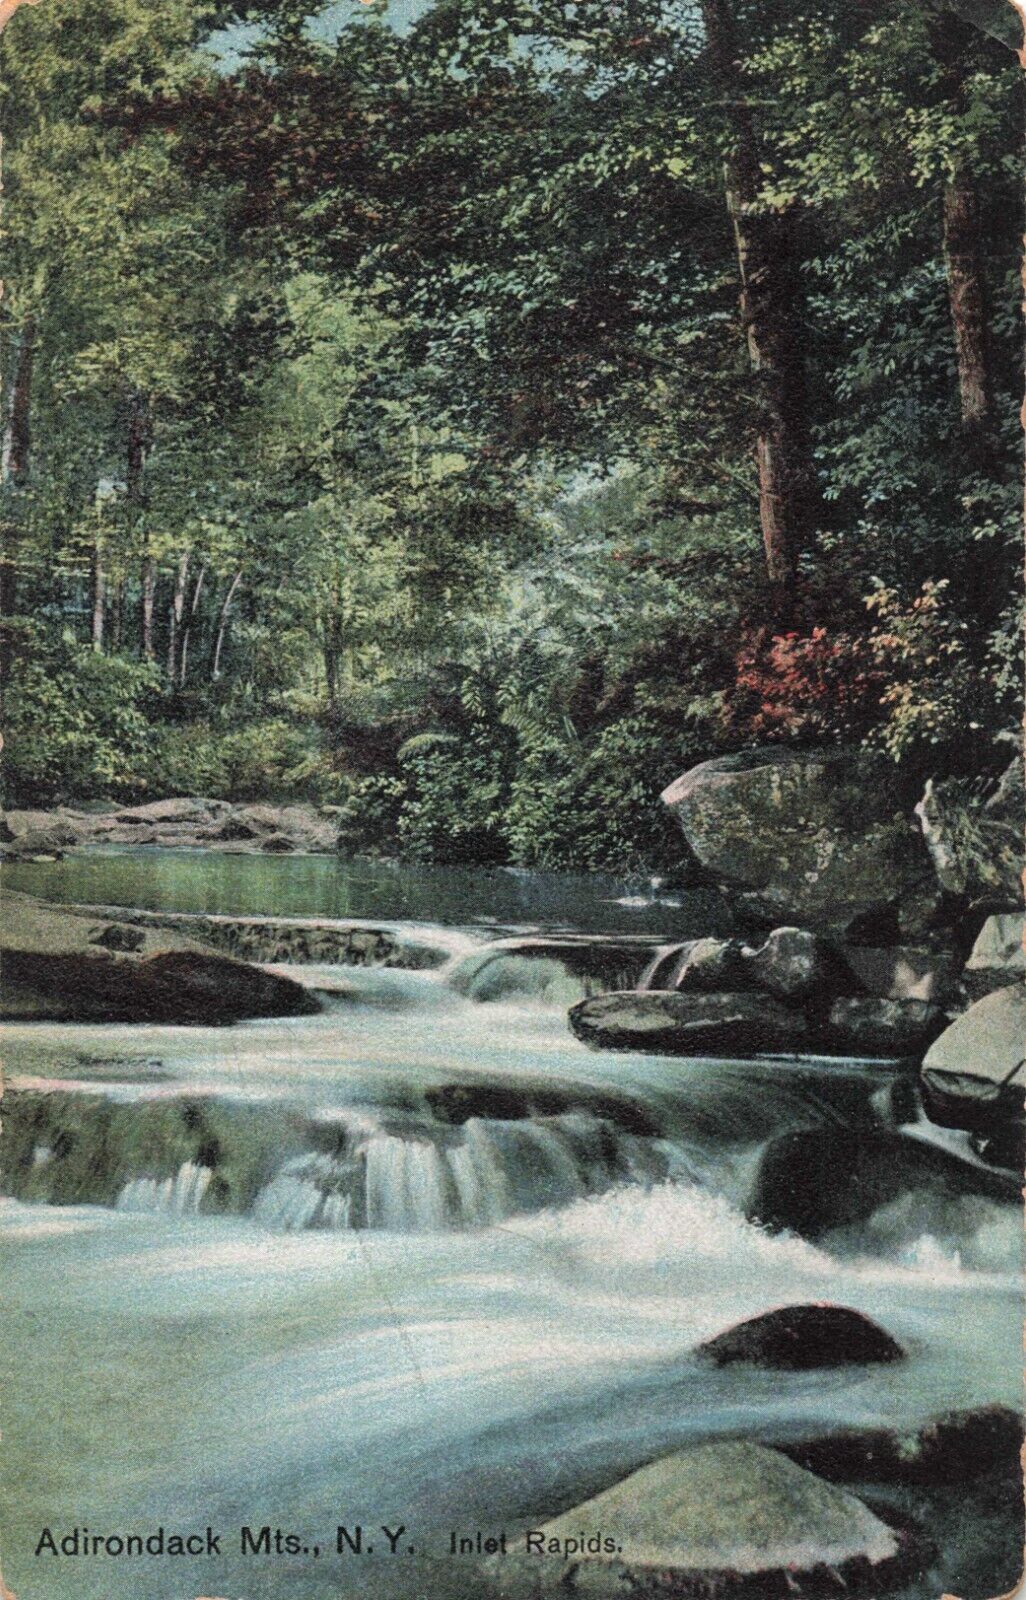 Adirondack Mountains NY New York, Inlet Rapids, Scenic View, Vintage Postcard